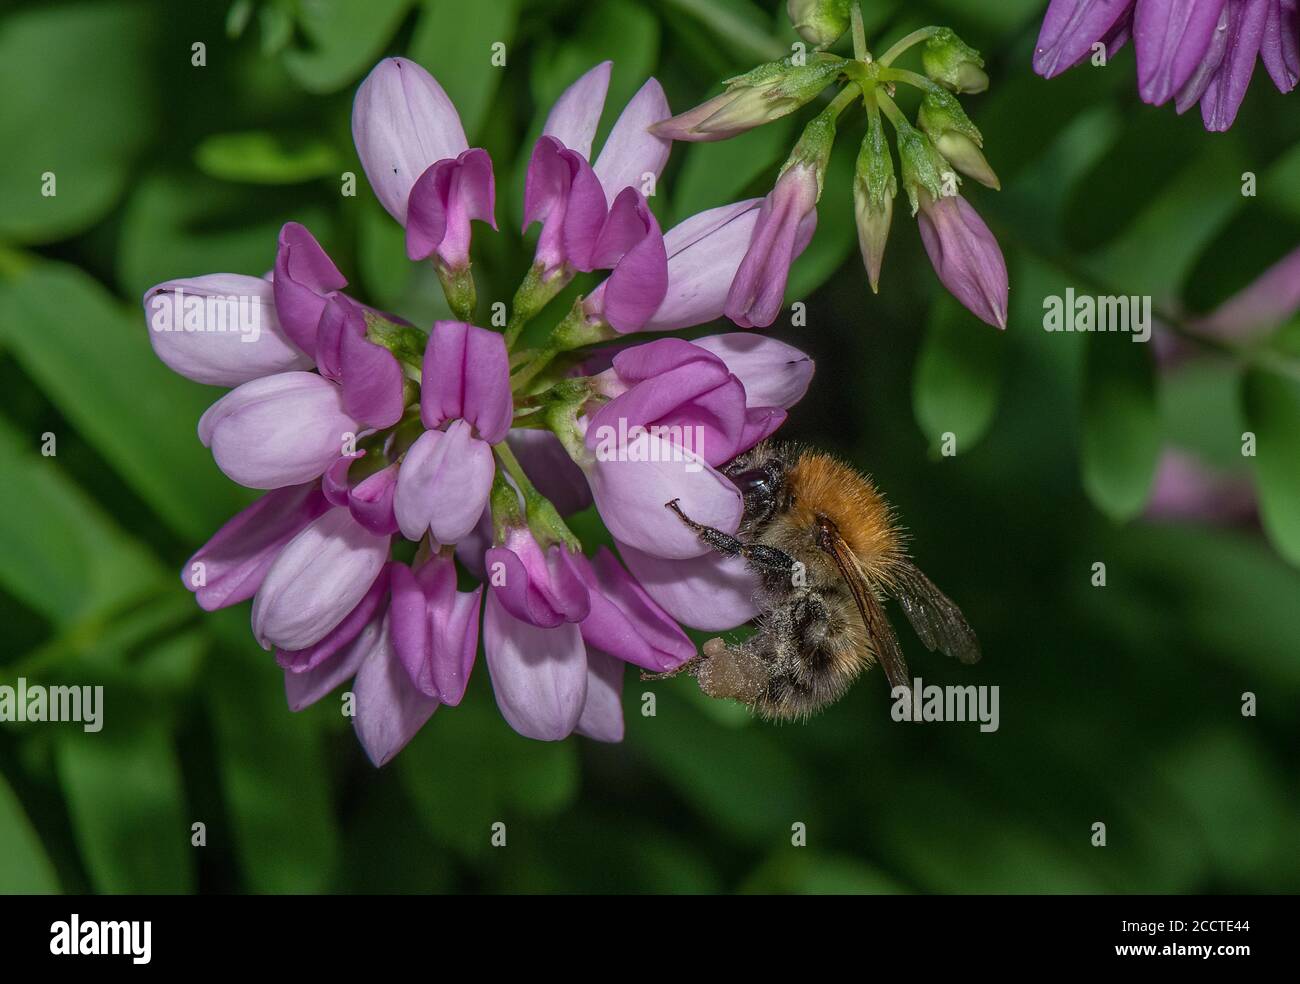 Common Carder Bee, Bombus pascuorum visiting flowers of Crown vetch, Securigera varia, in wildlife garden. Stock Photo